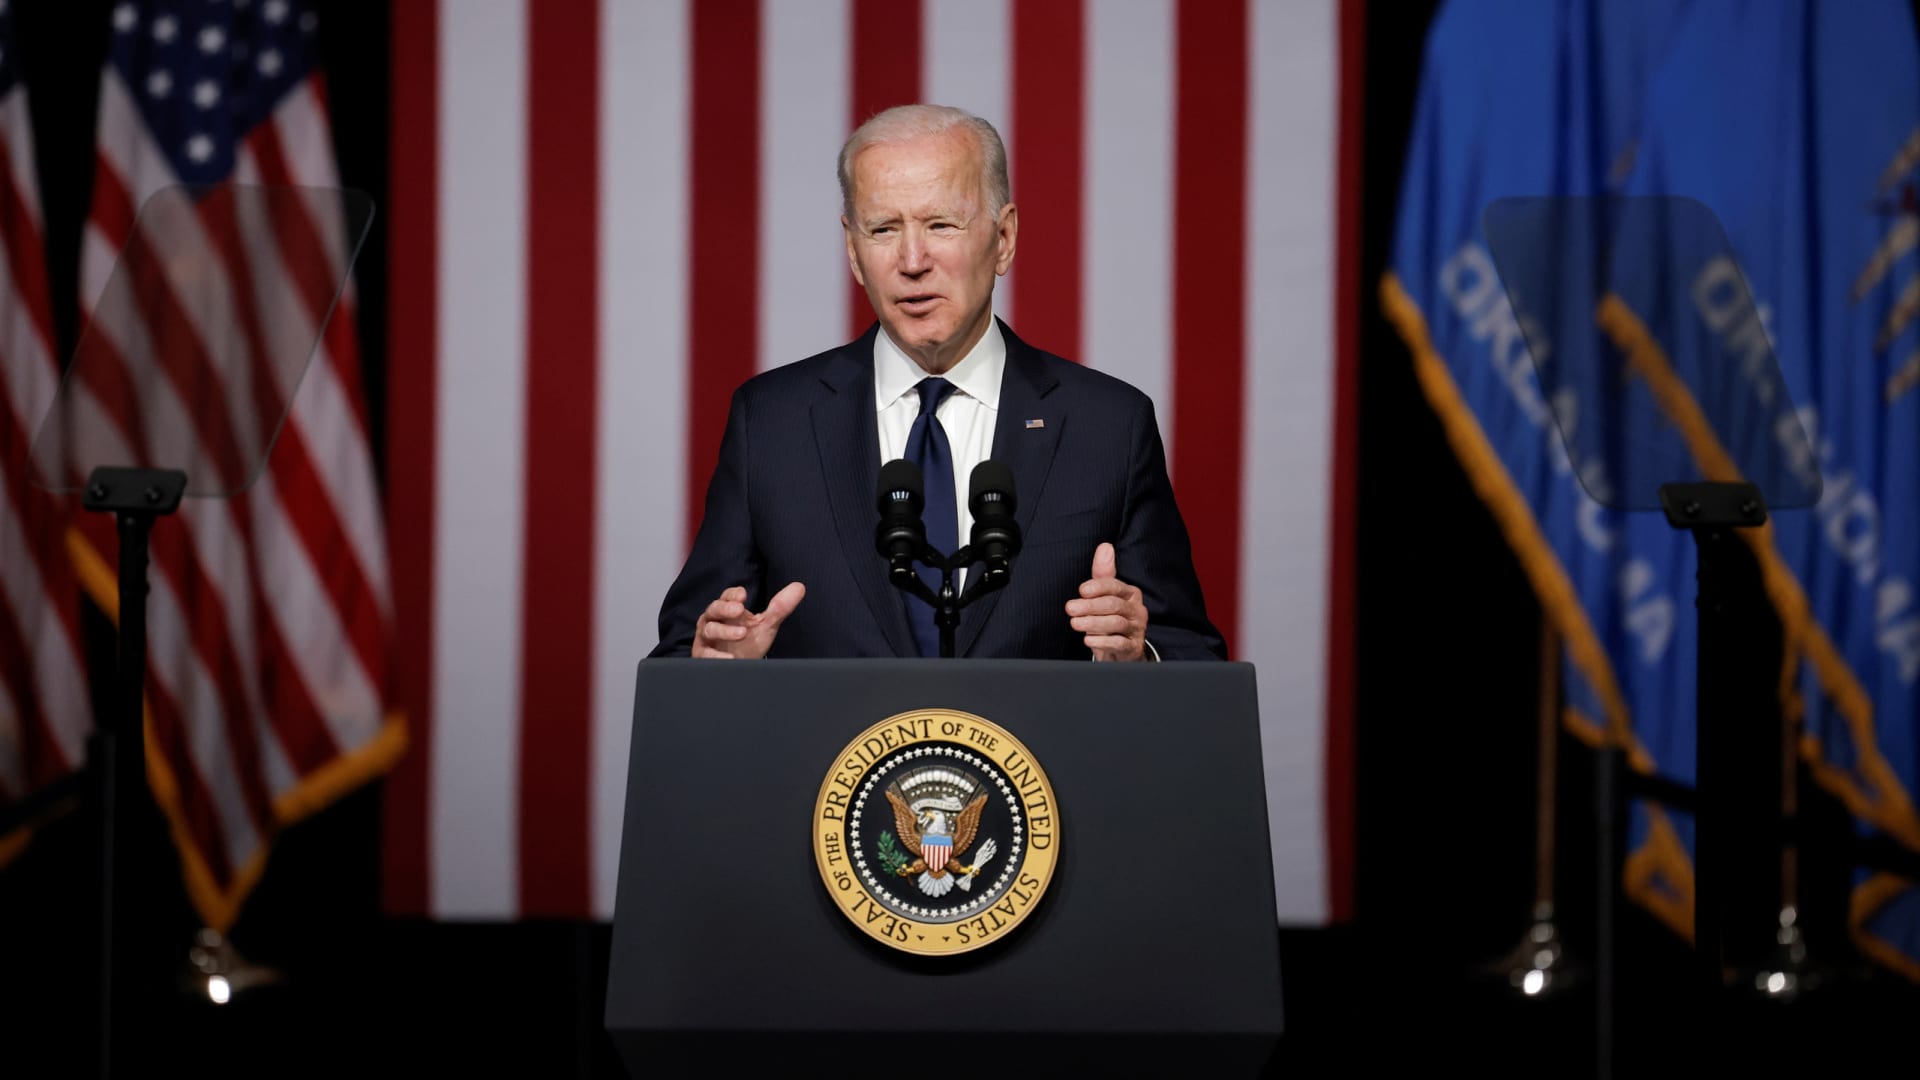 U.S. President Joe Biden delivers remarks on the centennial anniversary of the Tulsa race massacre during a visit to the Greenwood Cultural Center in Tulsa, Oklahoma, on June 1, 2021.